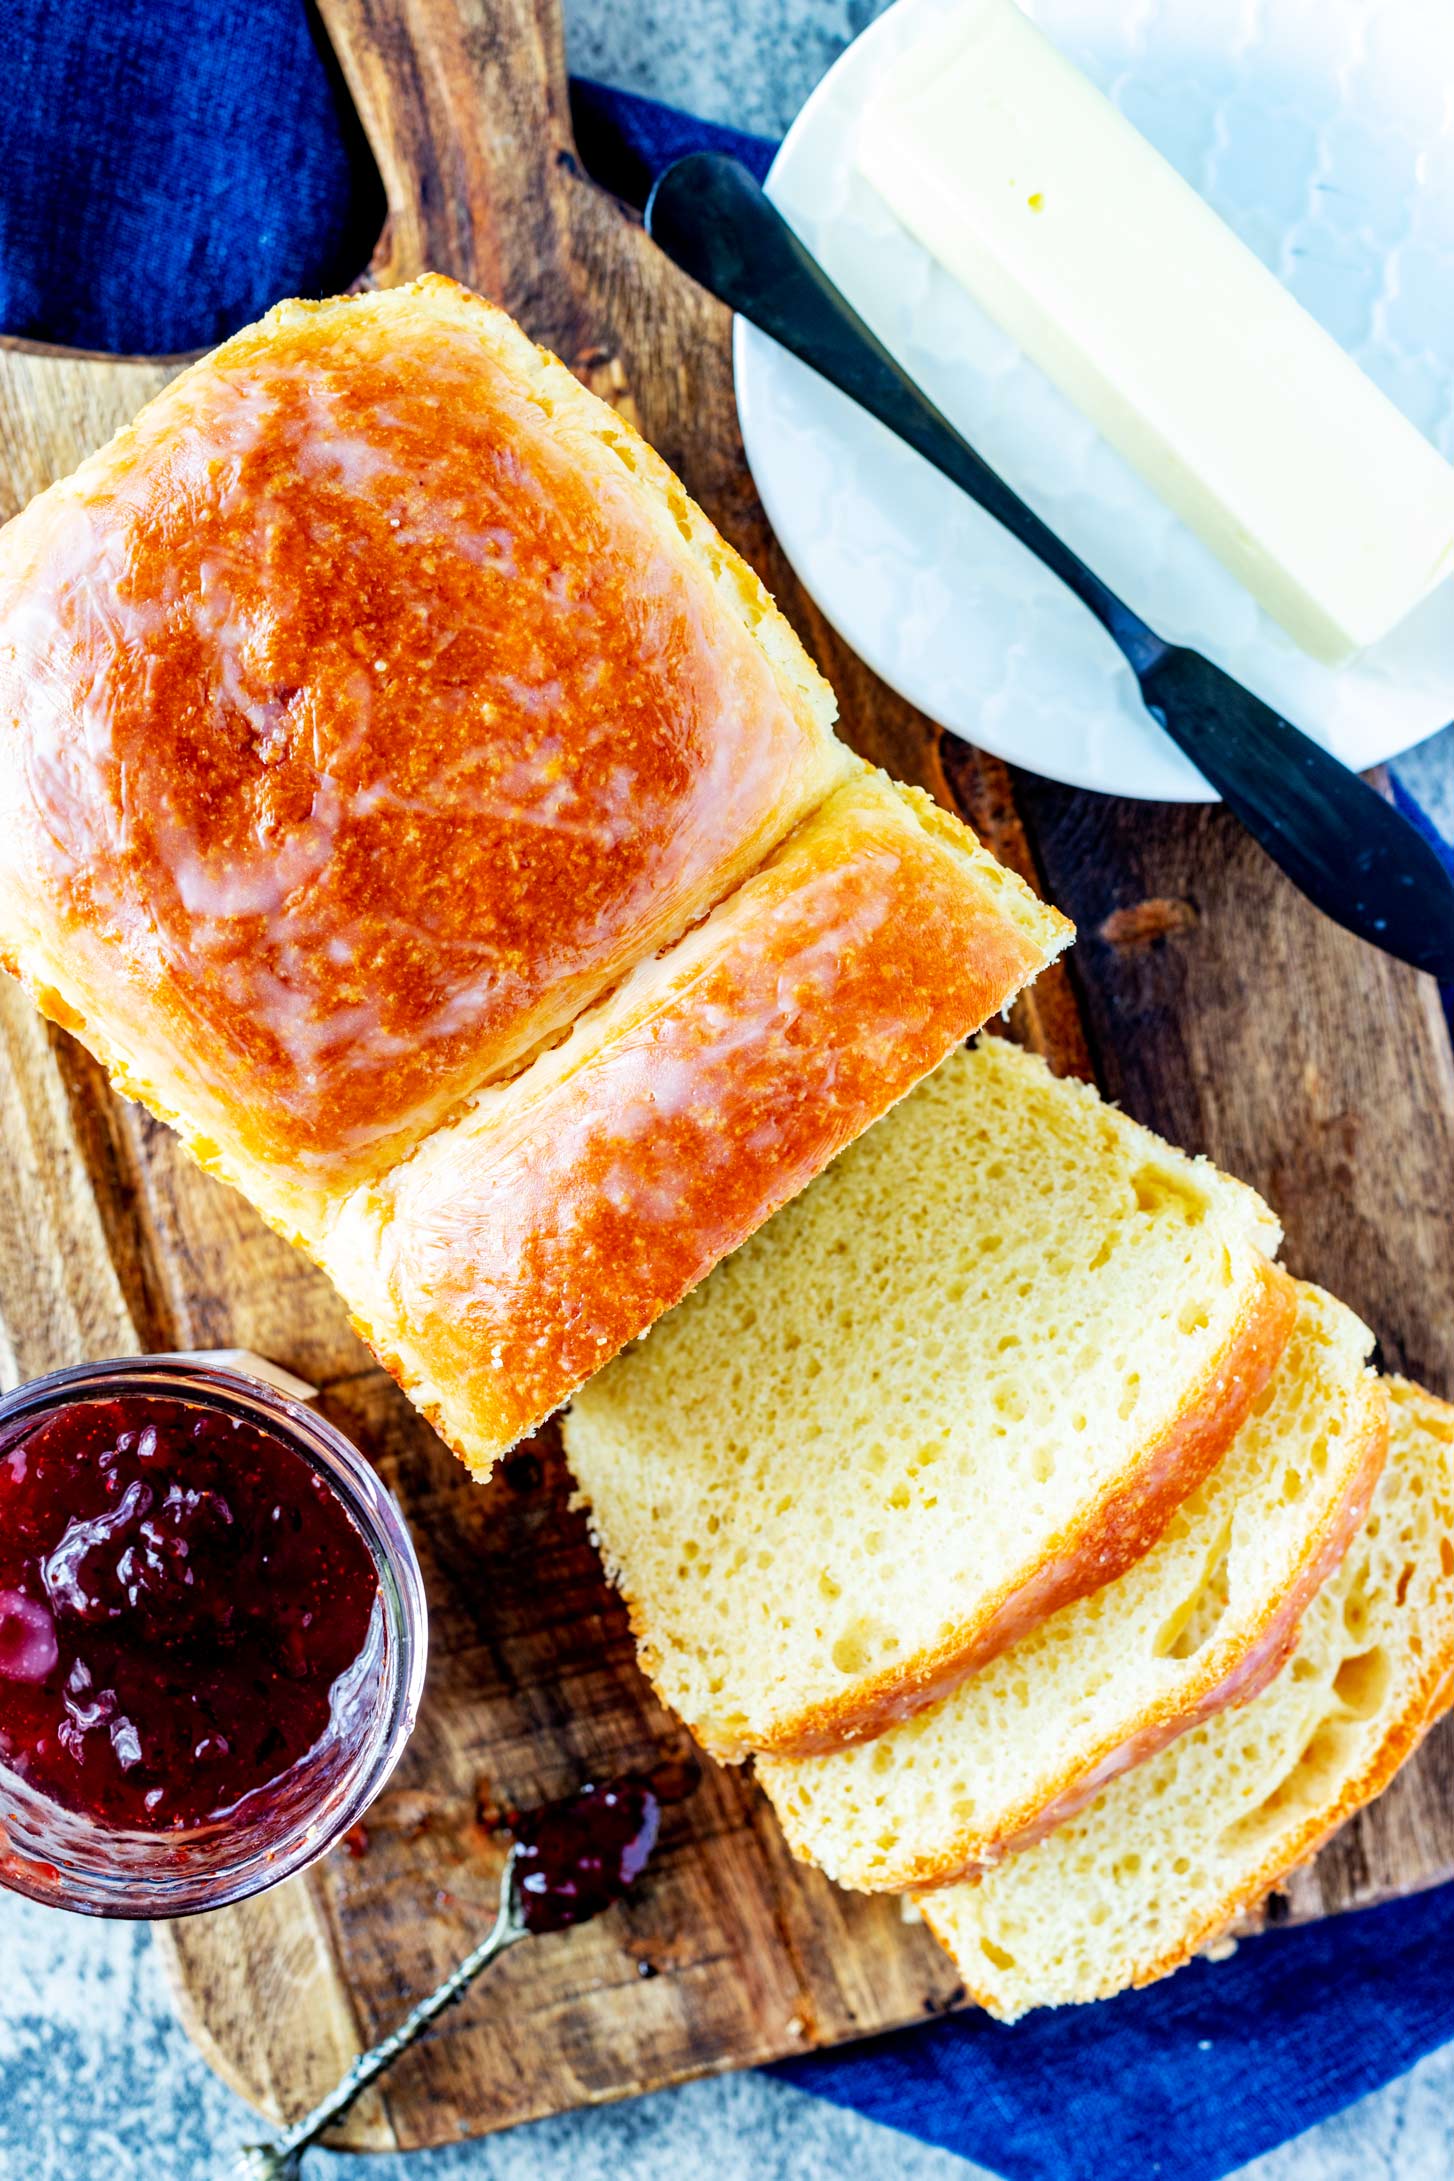 Partially sliced brioche bread on a cutting board with jam and butter next to it.